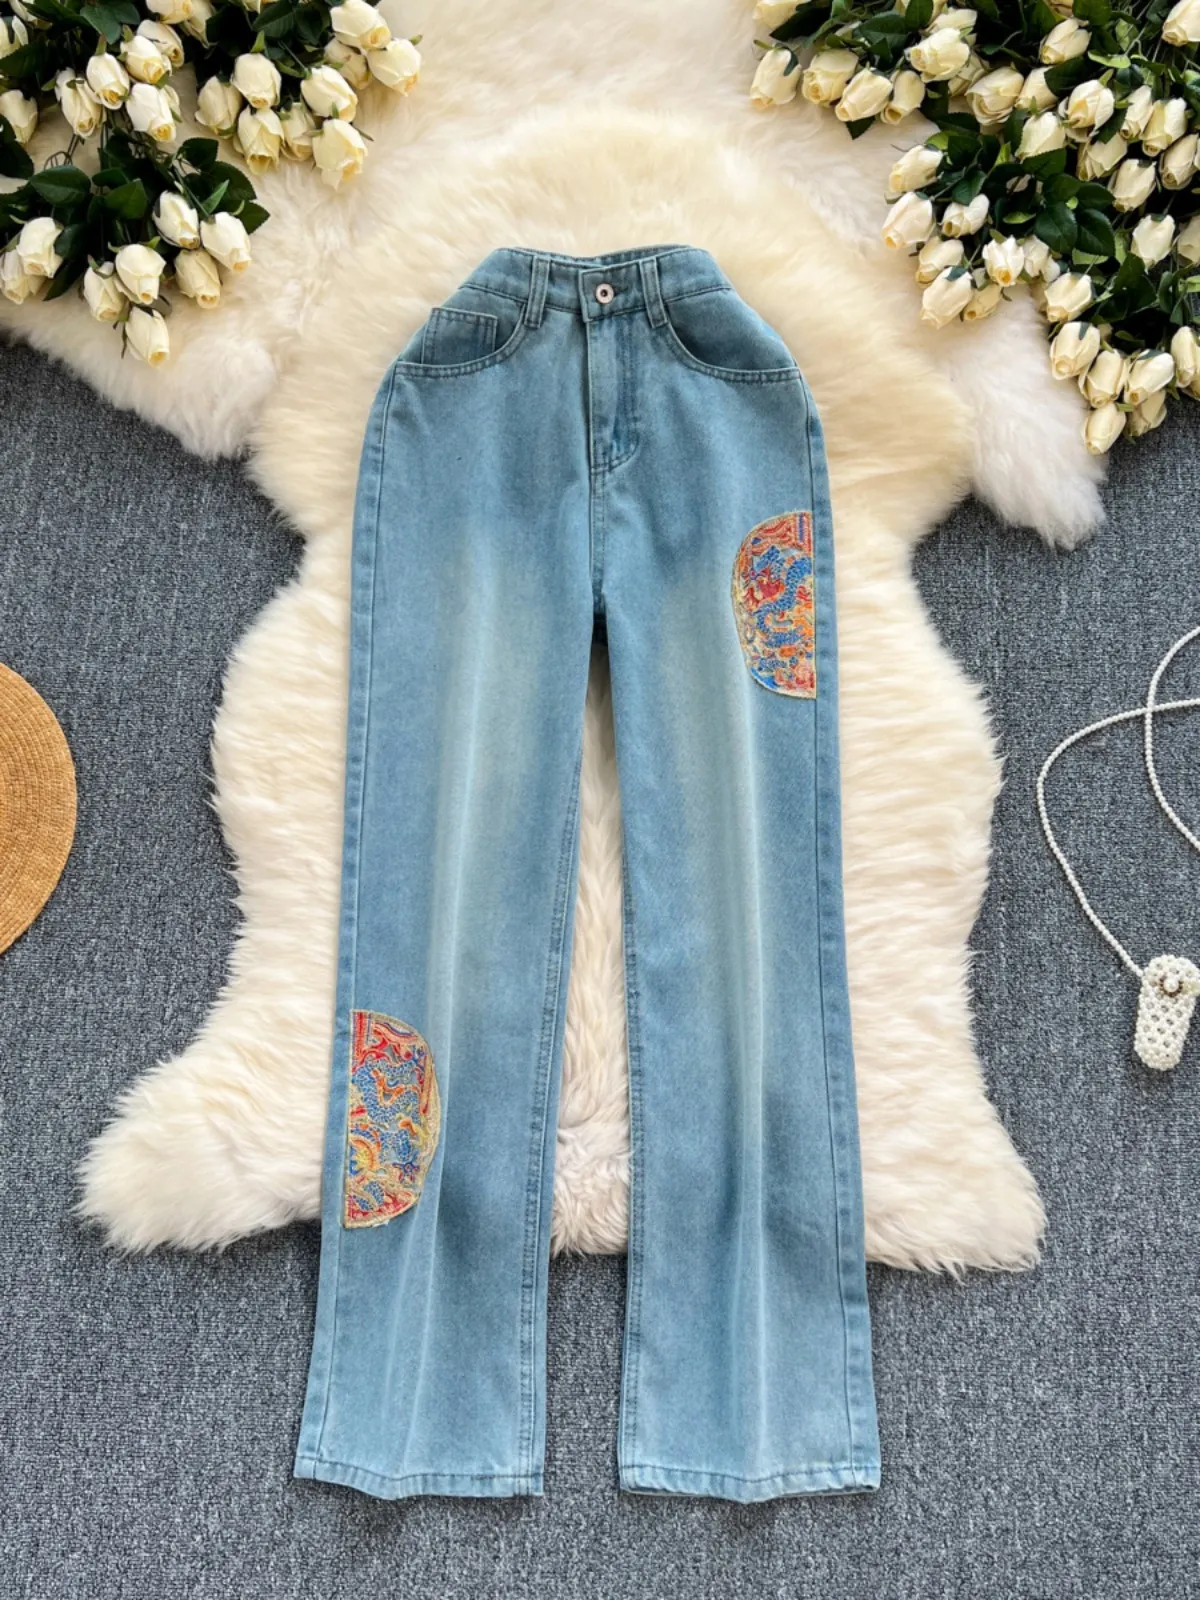 New Chinese style China-Chic style jeans, female Longteng embroidery design, thin, high waist, wide leg, straight pants